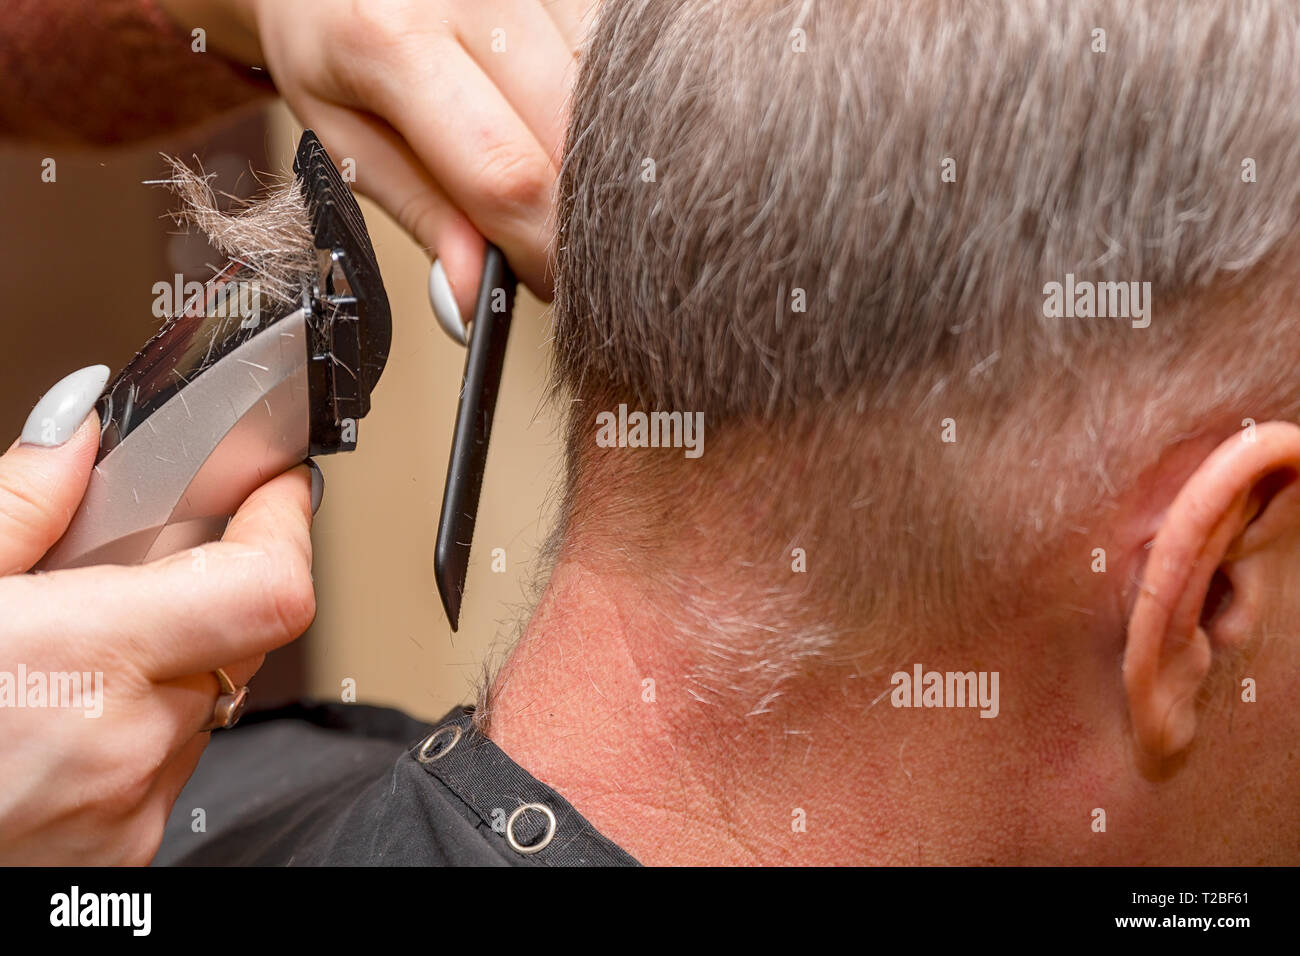 how to cut a man's hair with a clipper